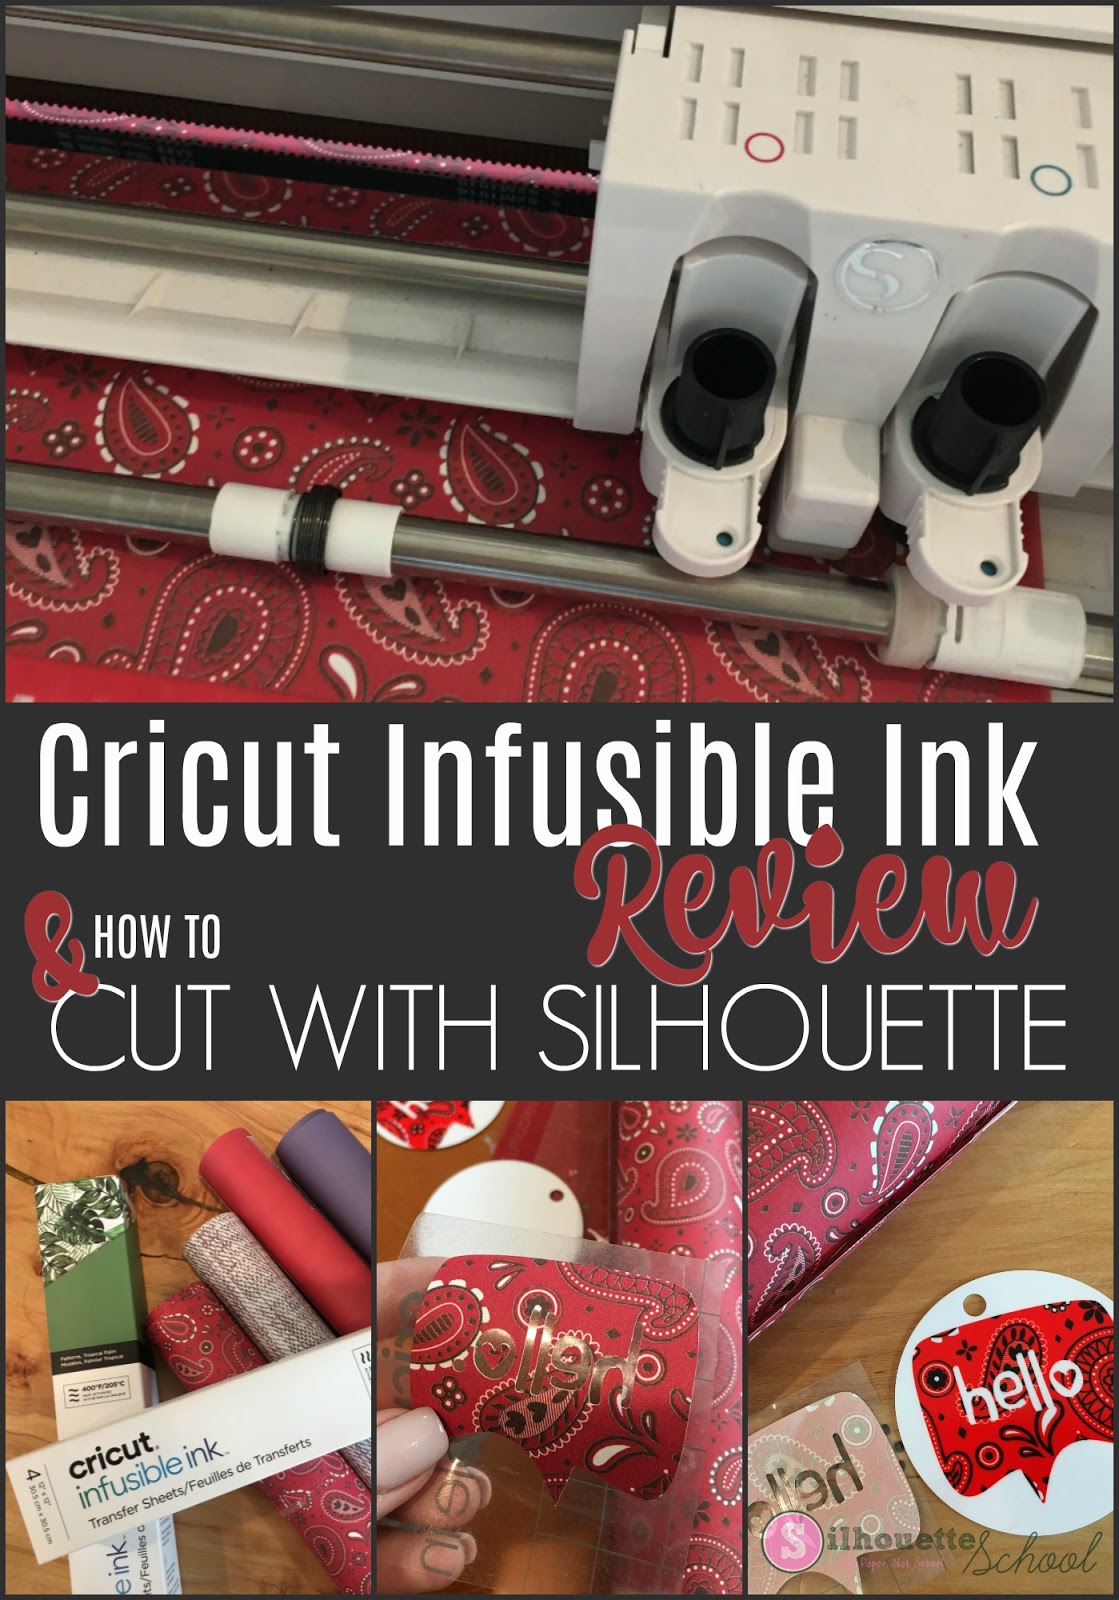 Cricut Infusible Ink Transfer sheets 30.5 x 30.5 cm (4 sheets) for